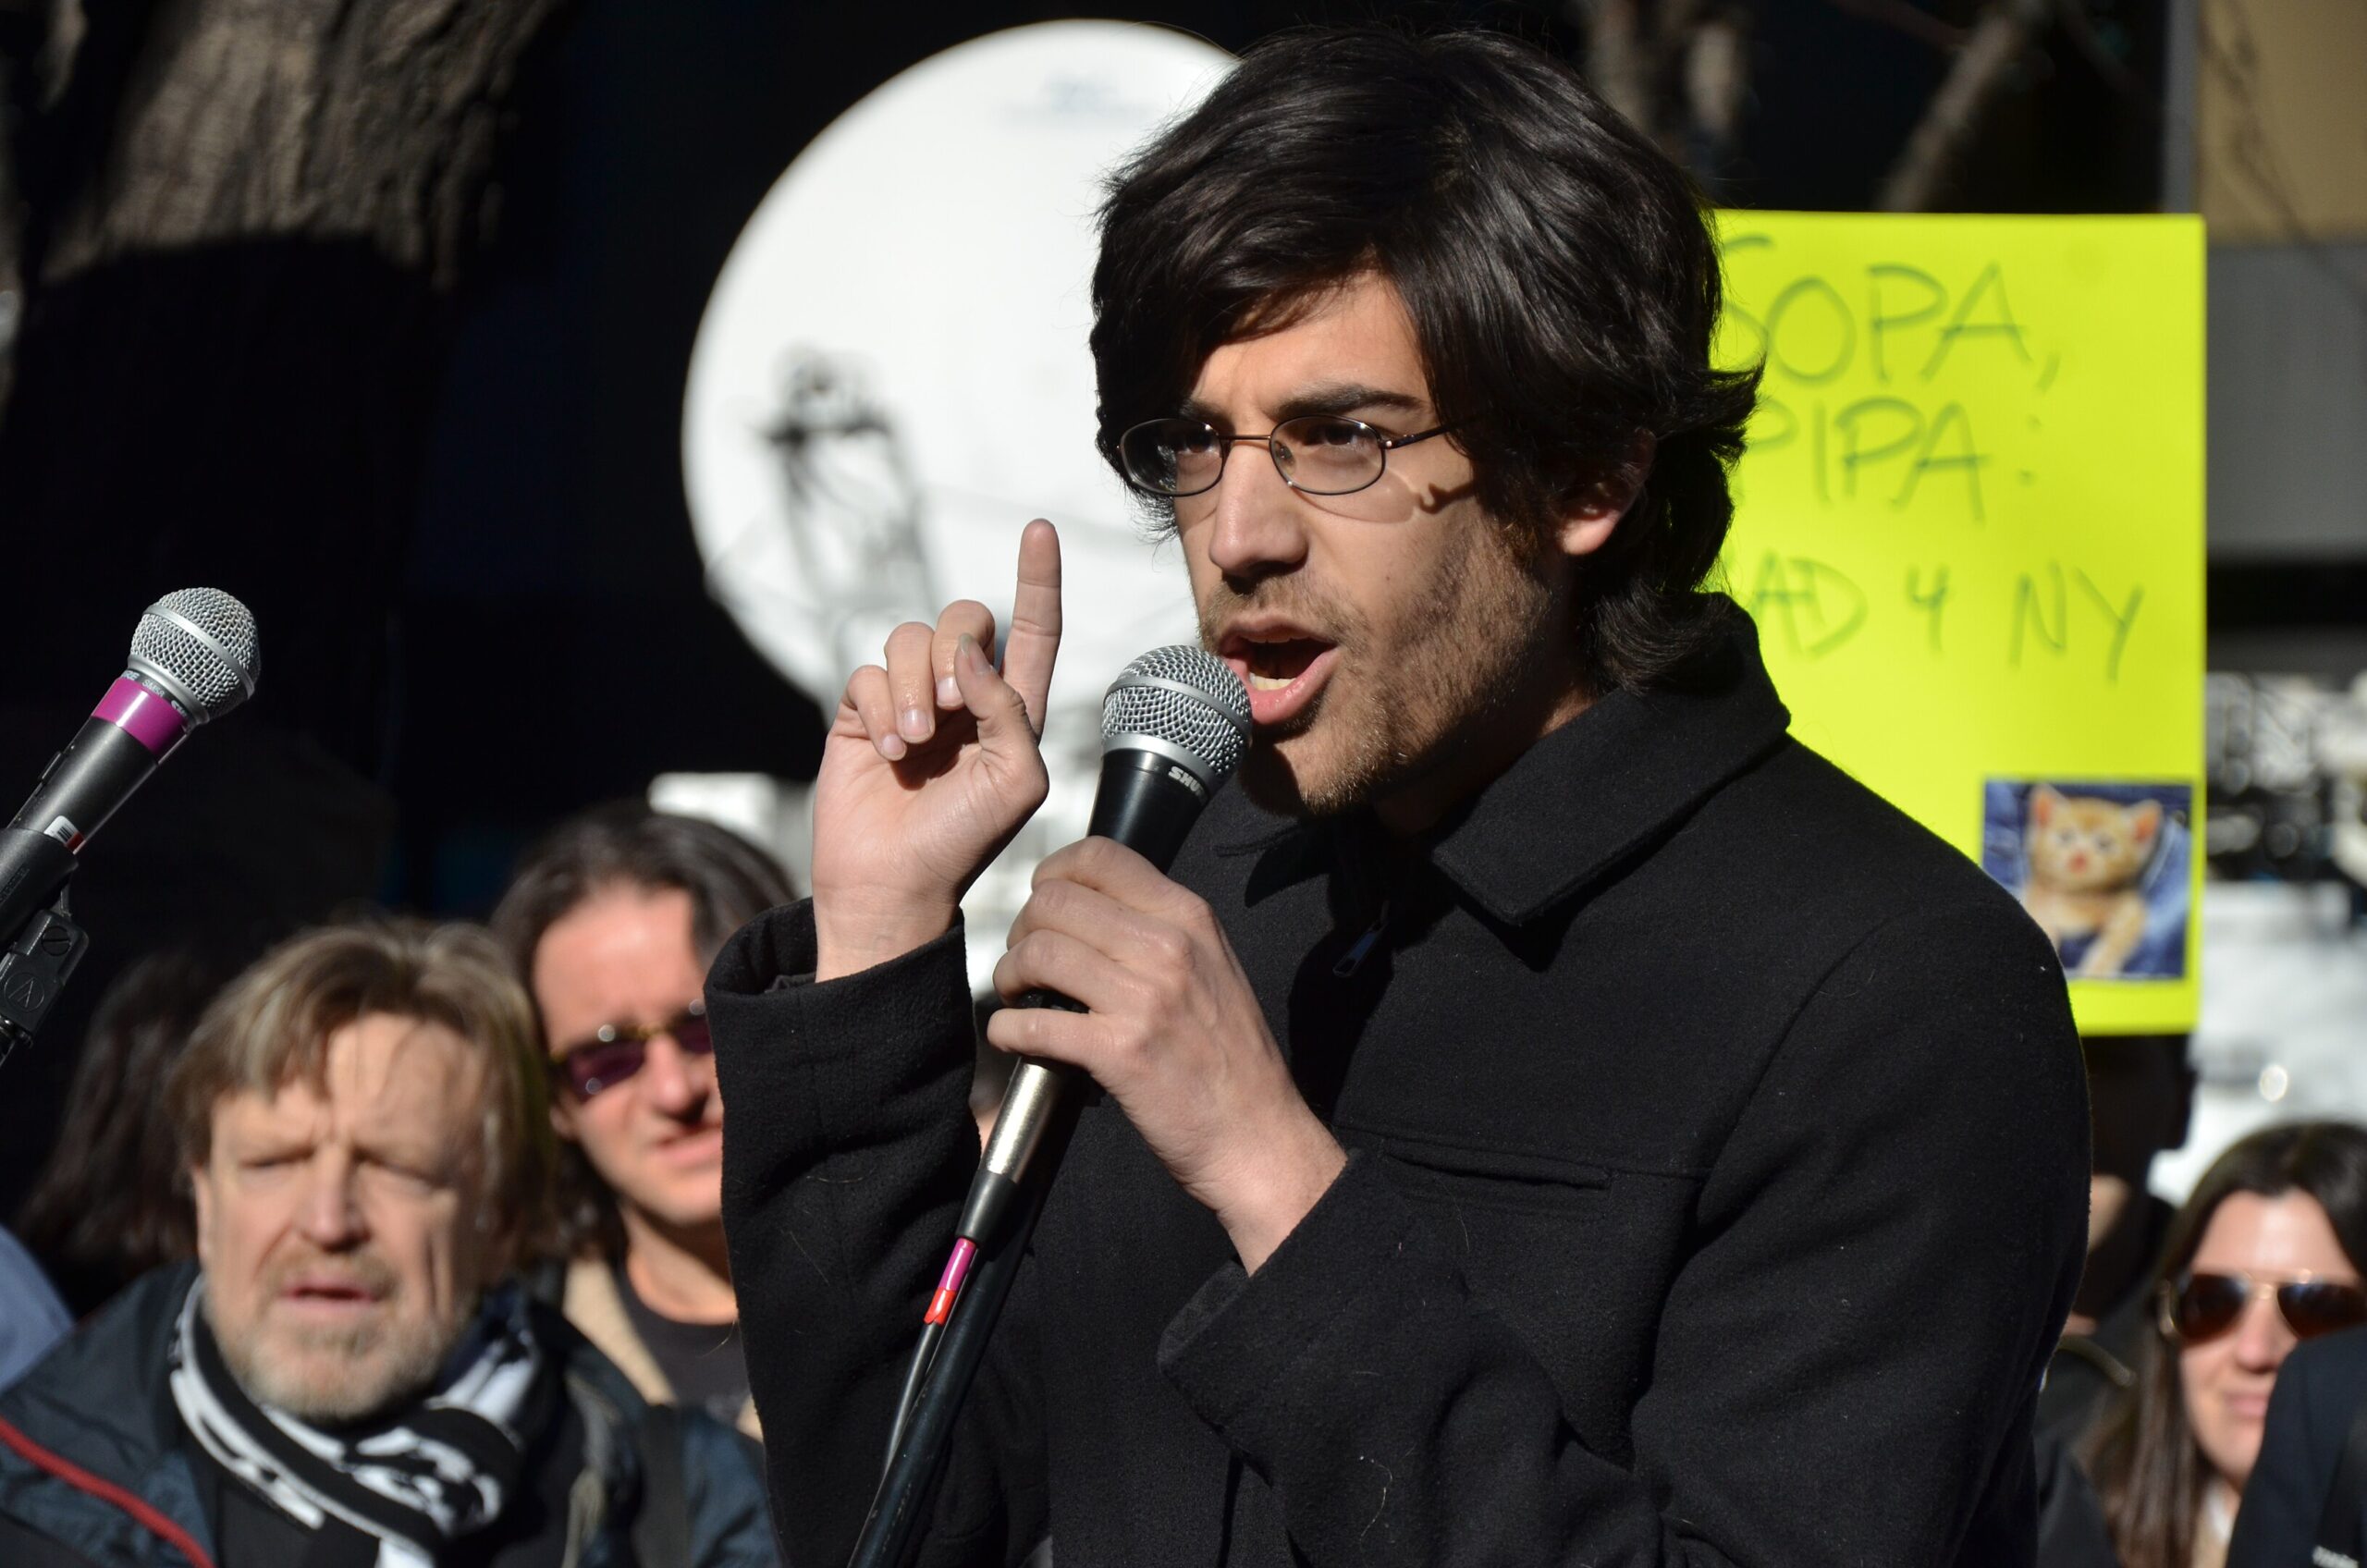 Filmscreening + Discussion: The Internet’s Own Boy: The Story of Aaron Swartz (OV) [FREIRAUMFEST]